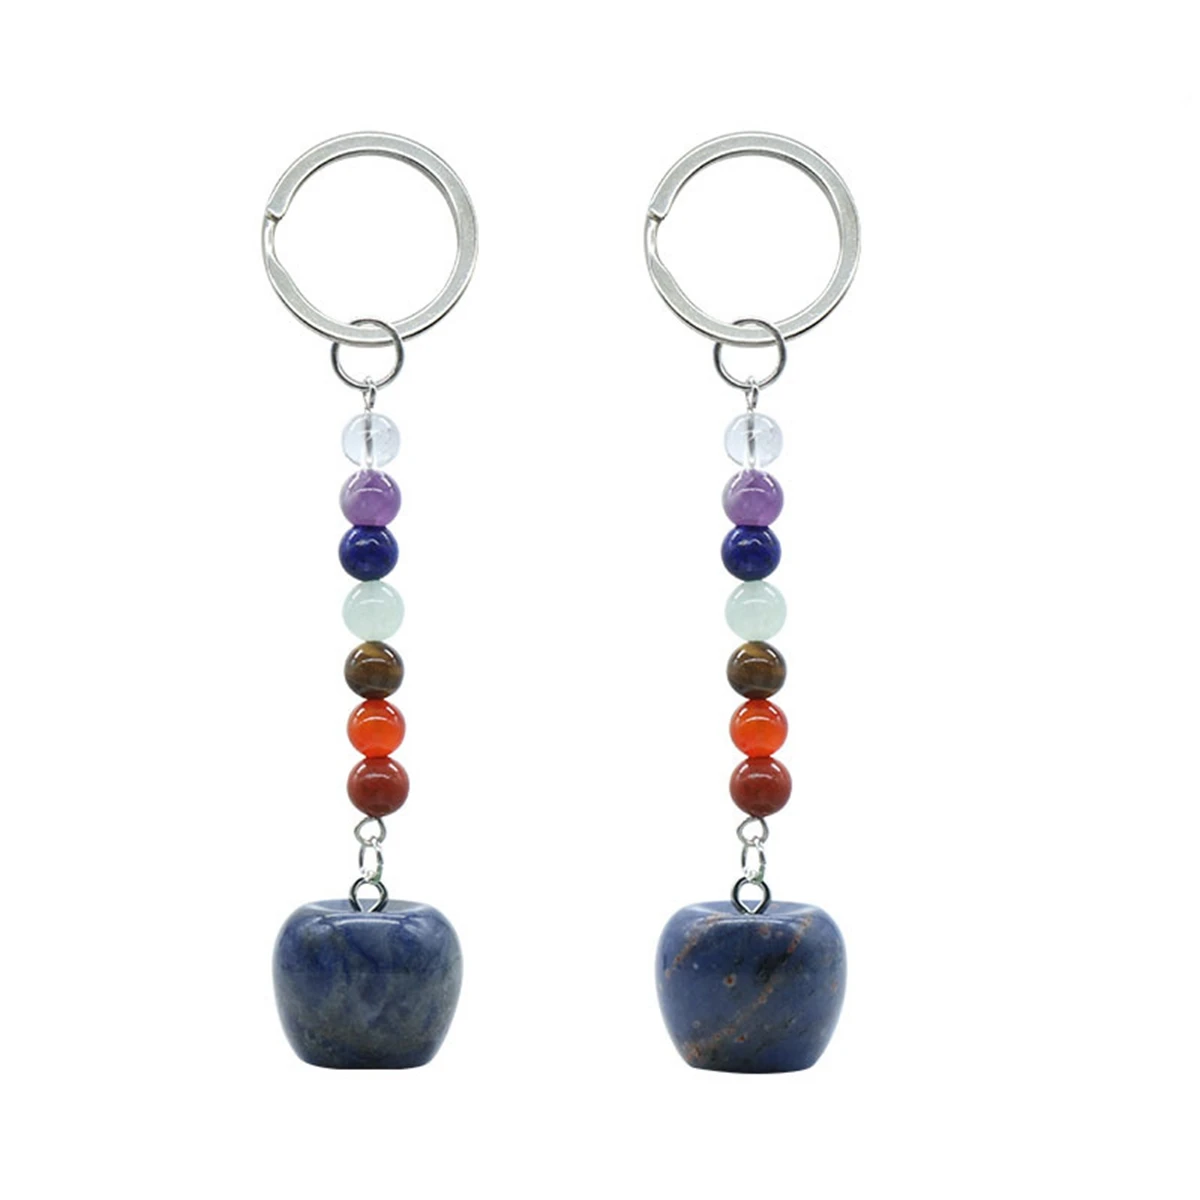 

2PCS Sodalite Apple Pendant Keychain Healing Crystals Tumbled Stone Keyring for Couple Best Friend Family